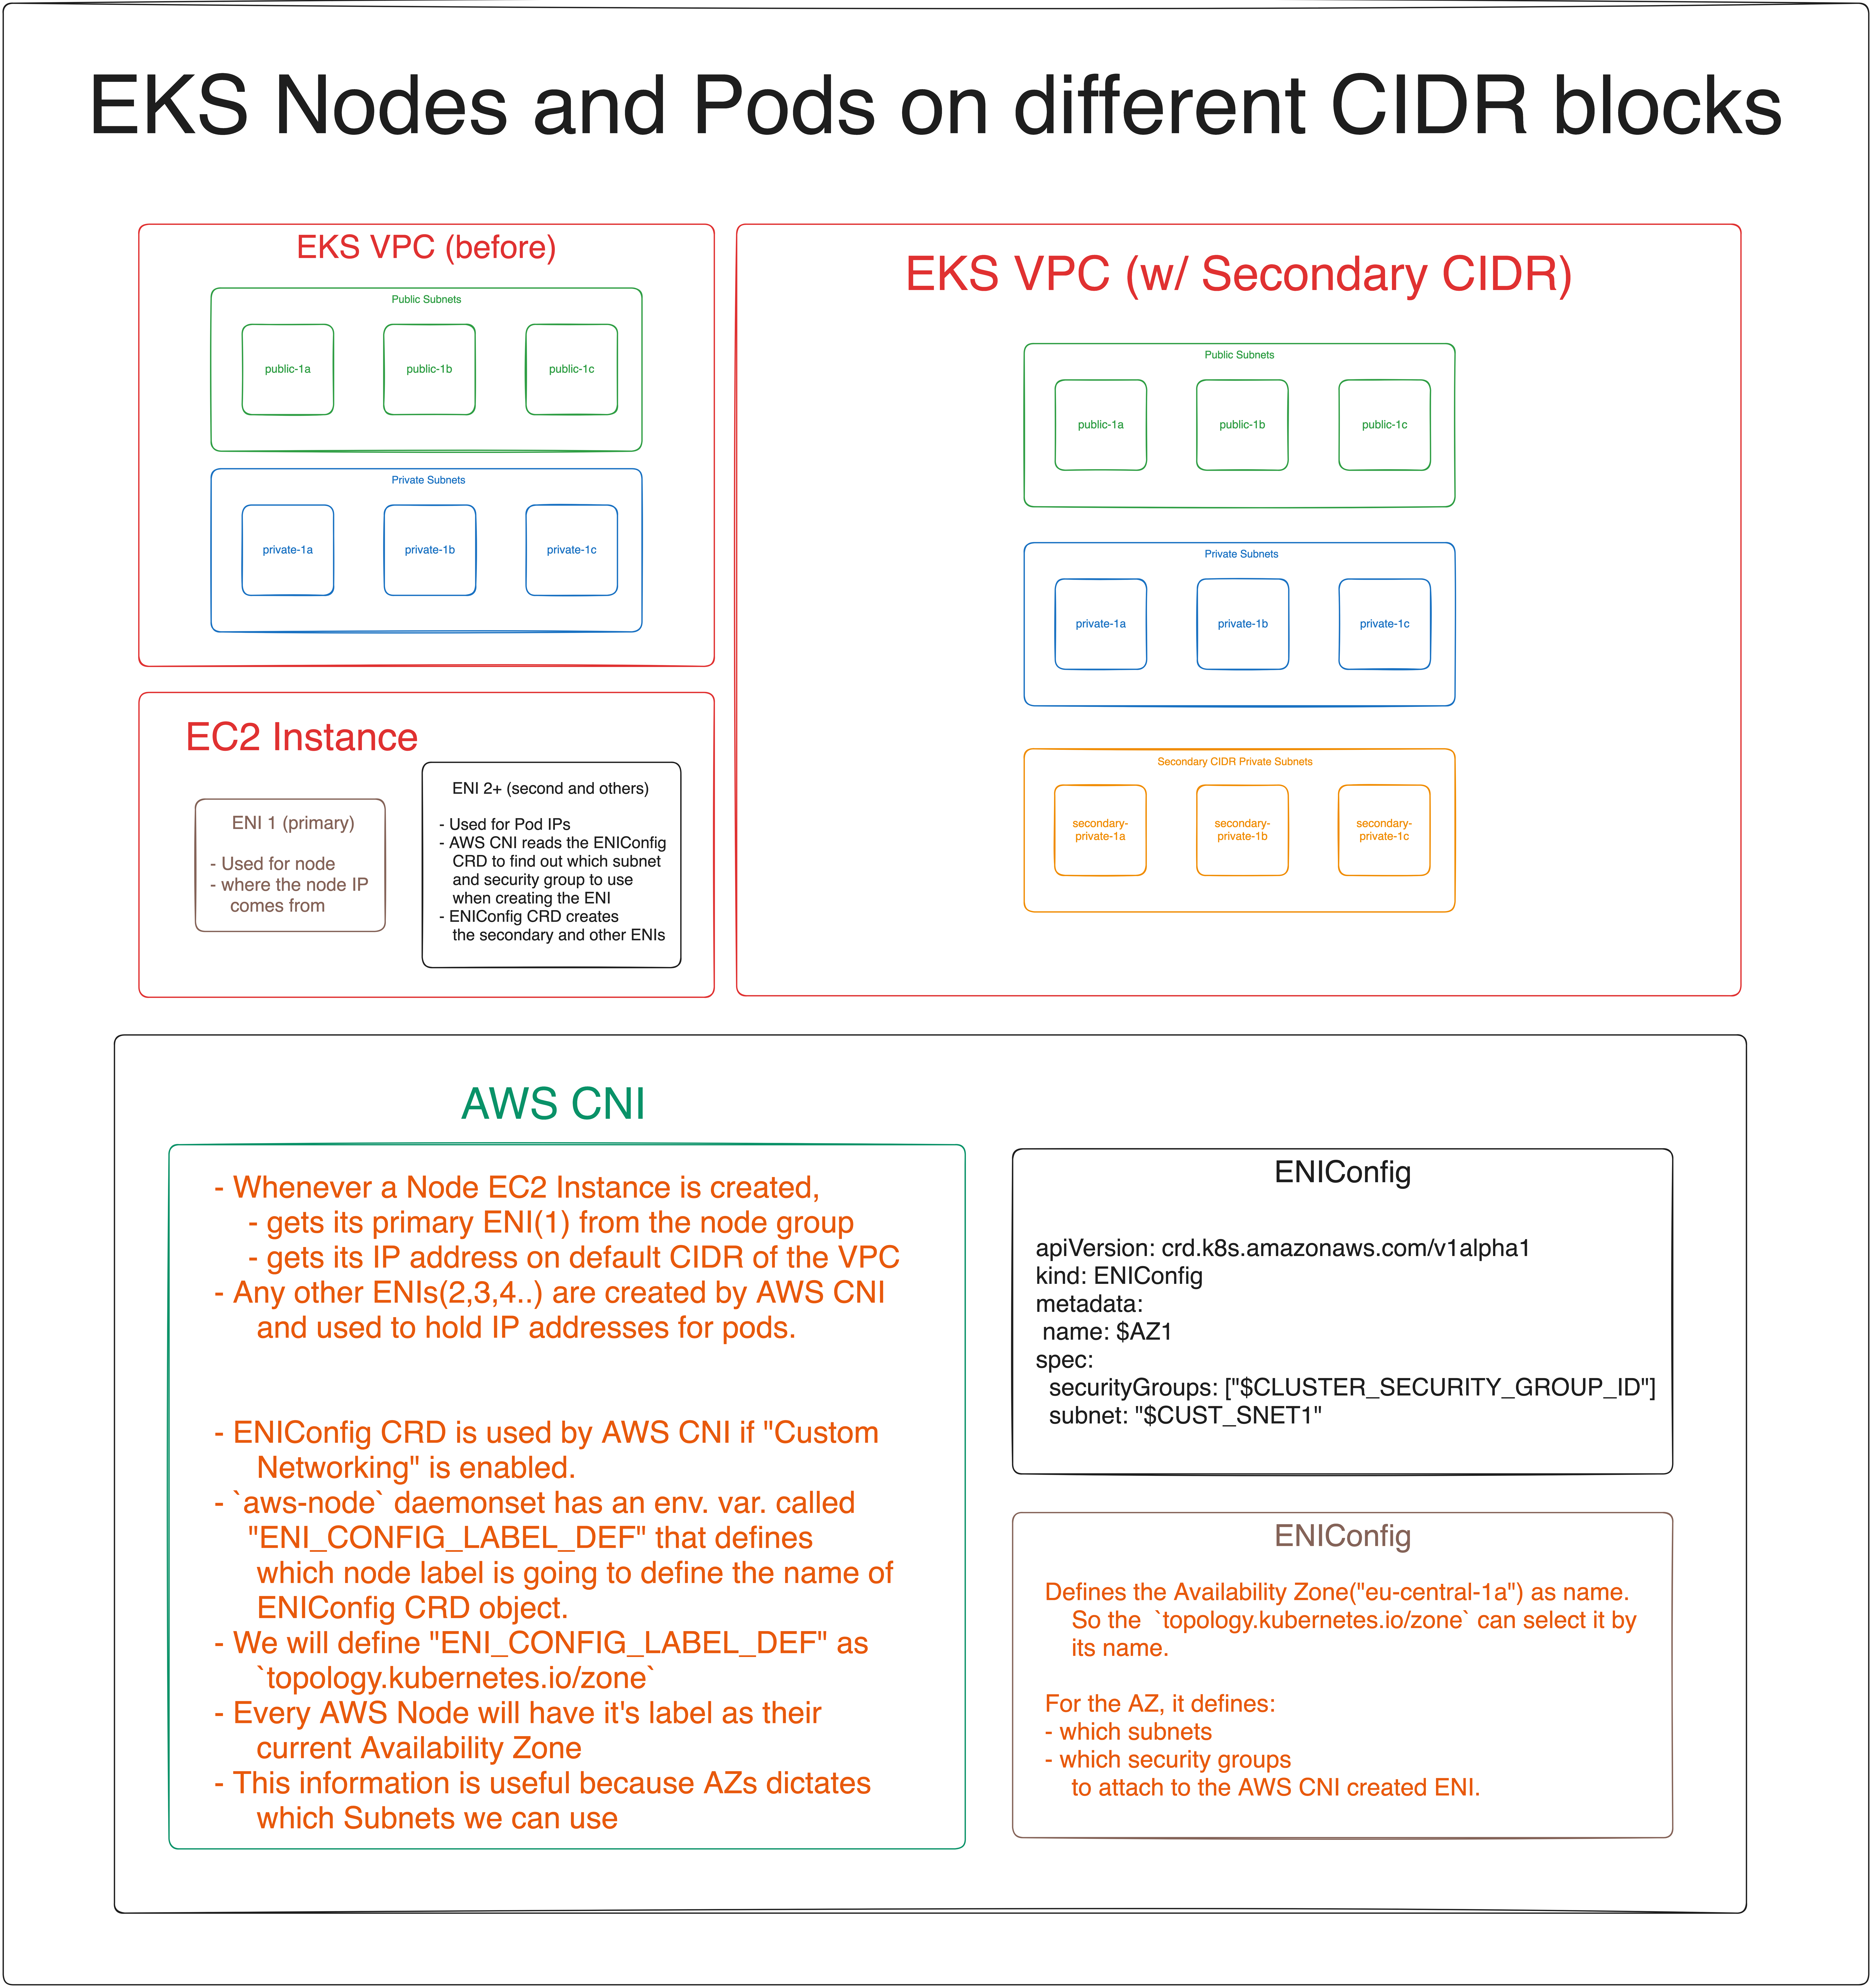 AWS CNI and ENIConfig Diagram